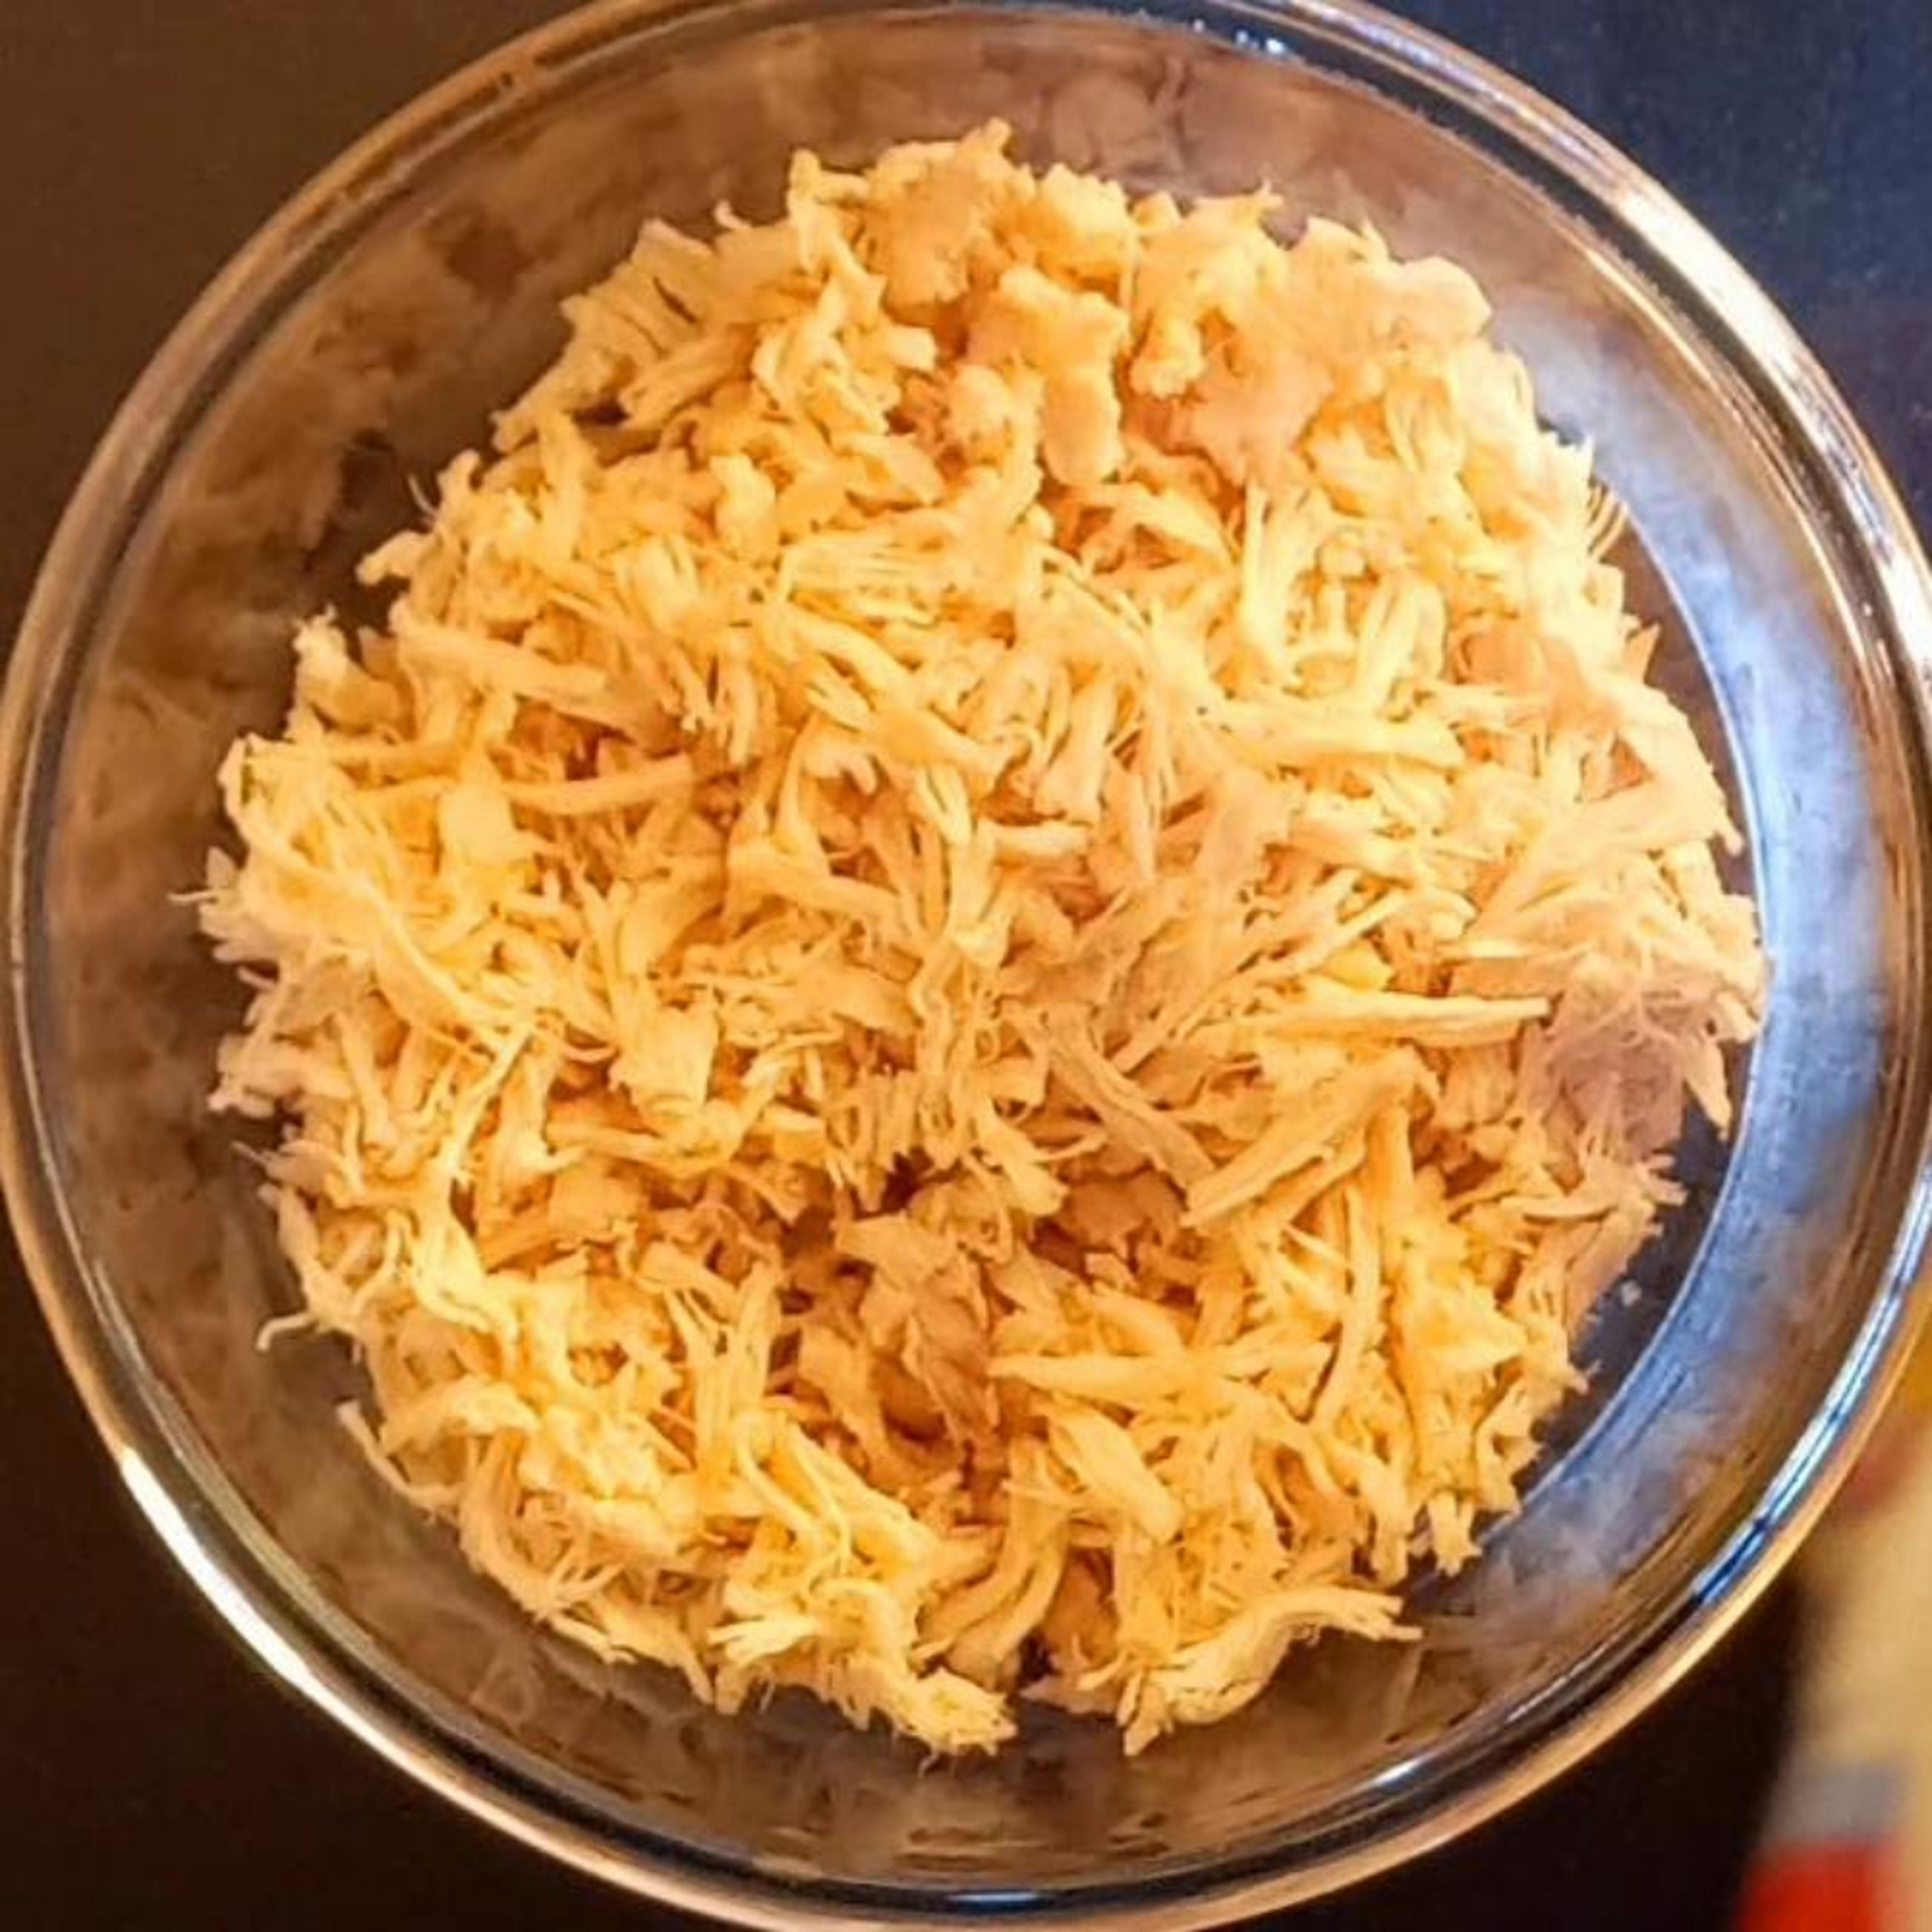 boiled chicken and shredded it.